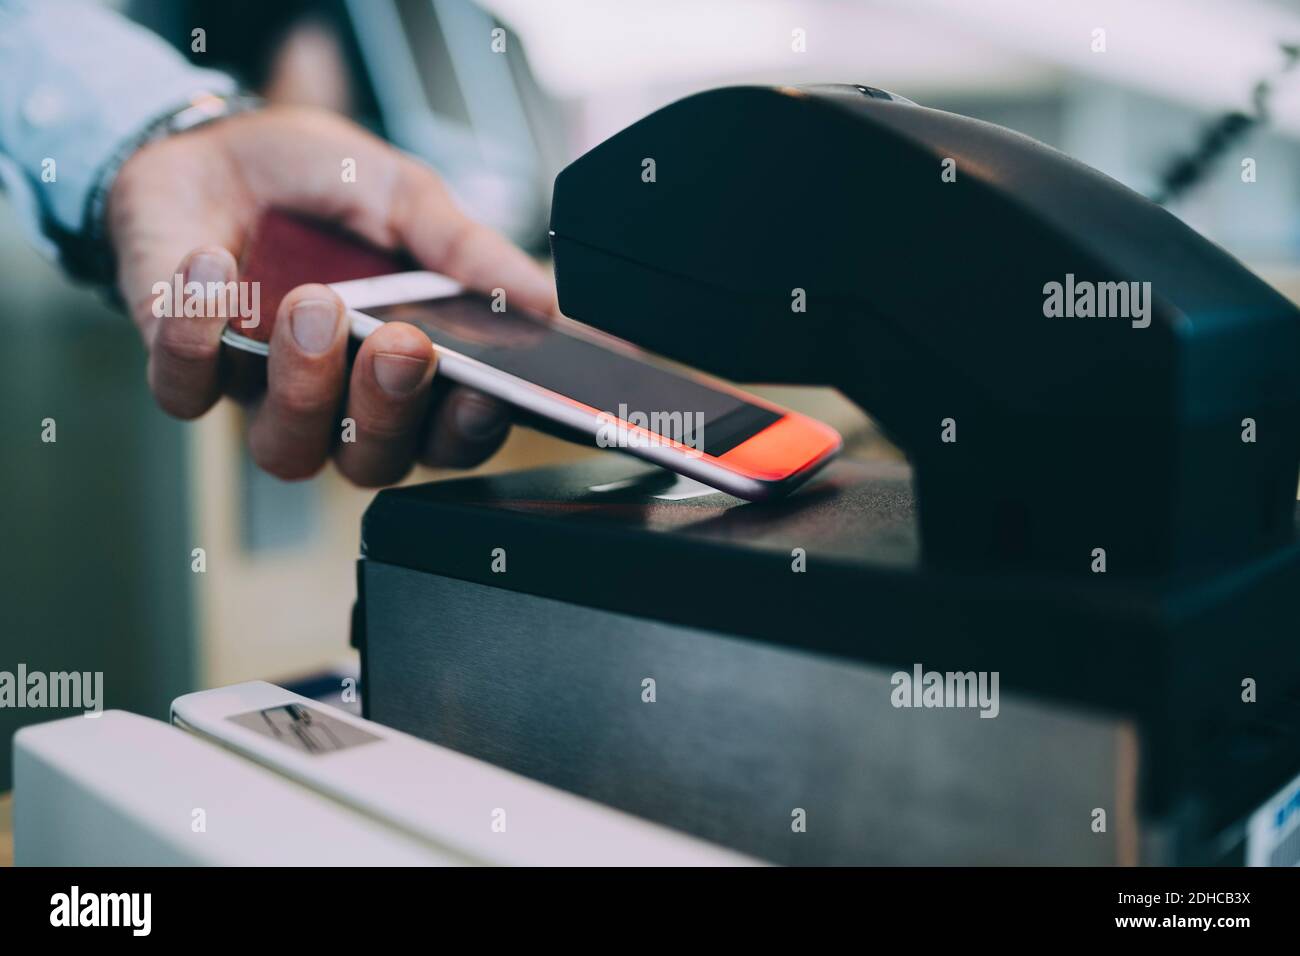 Cropped hands of businessman scanning ticket on smart phone at airport check-in counter Stock Photo